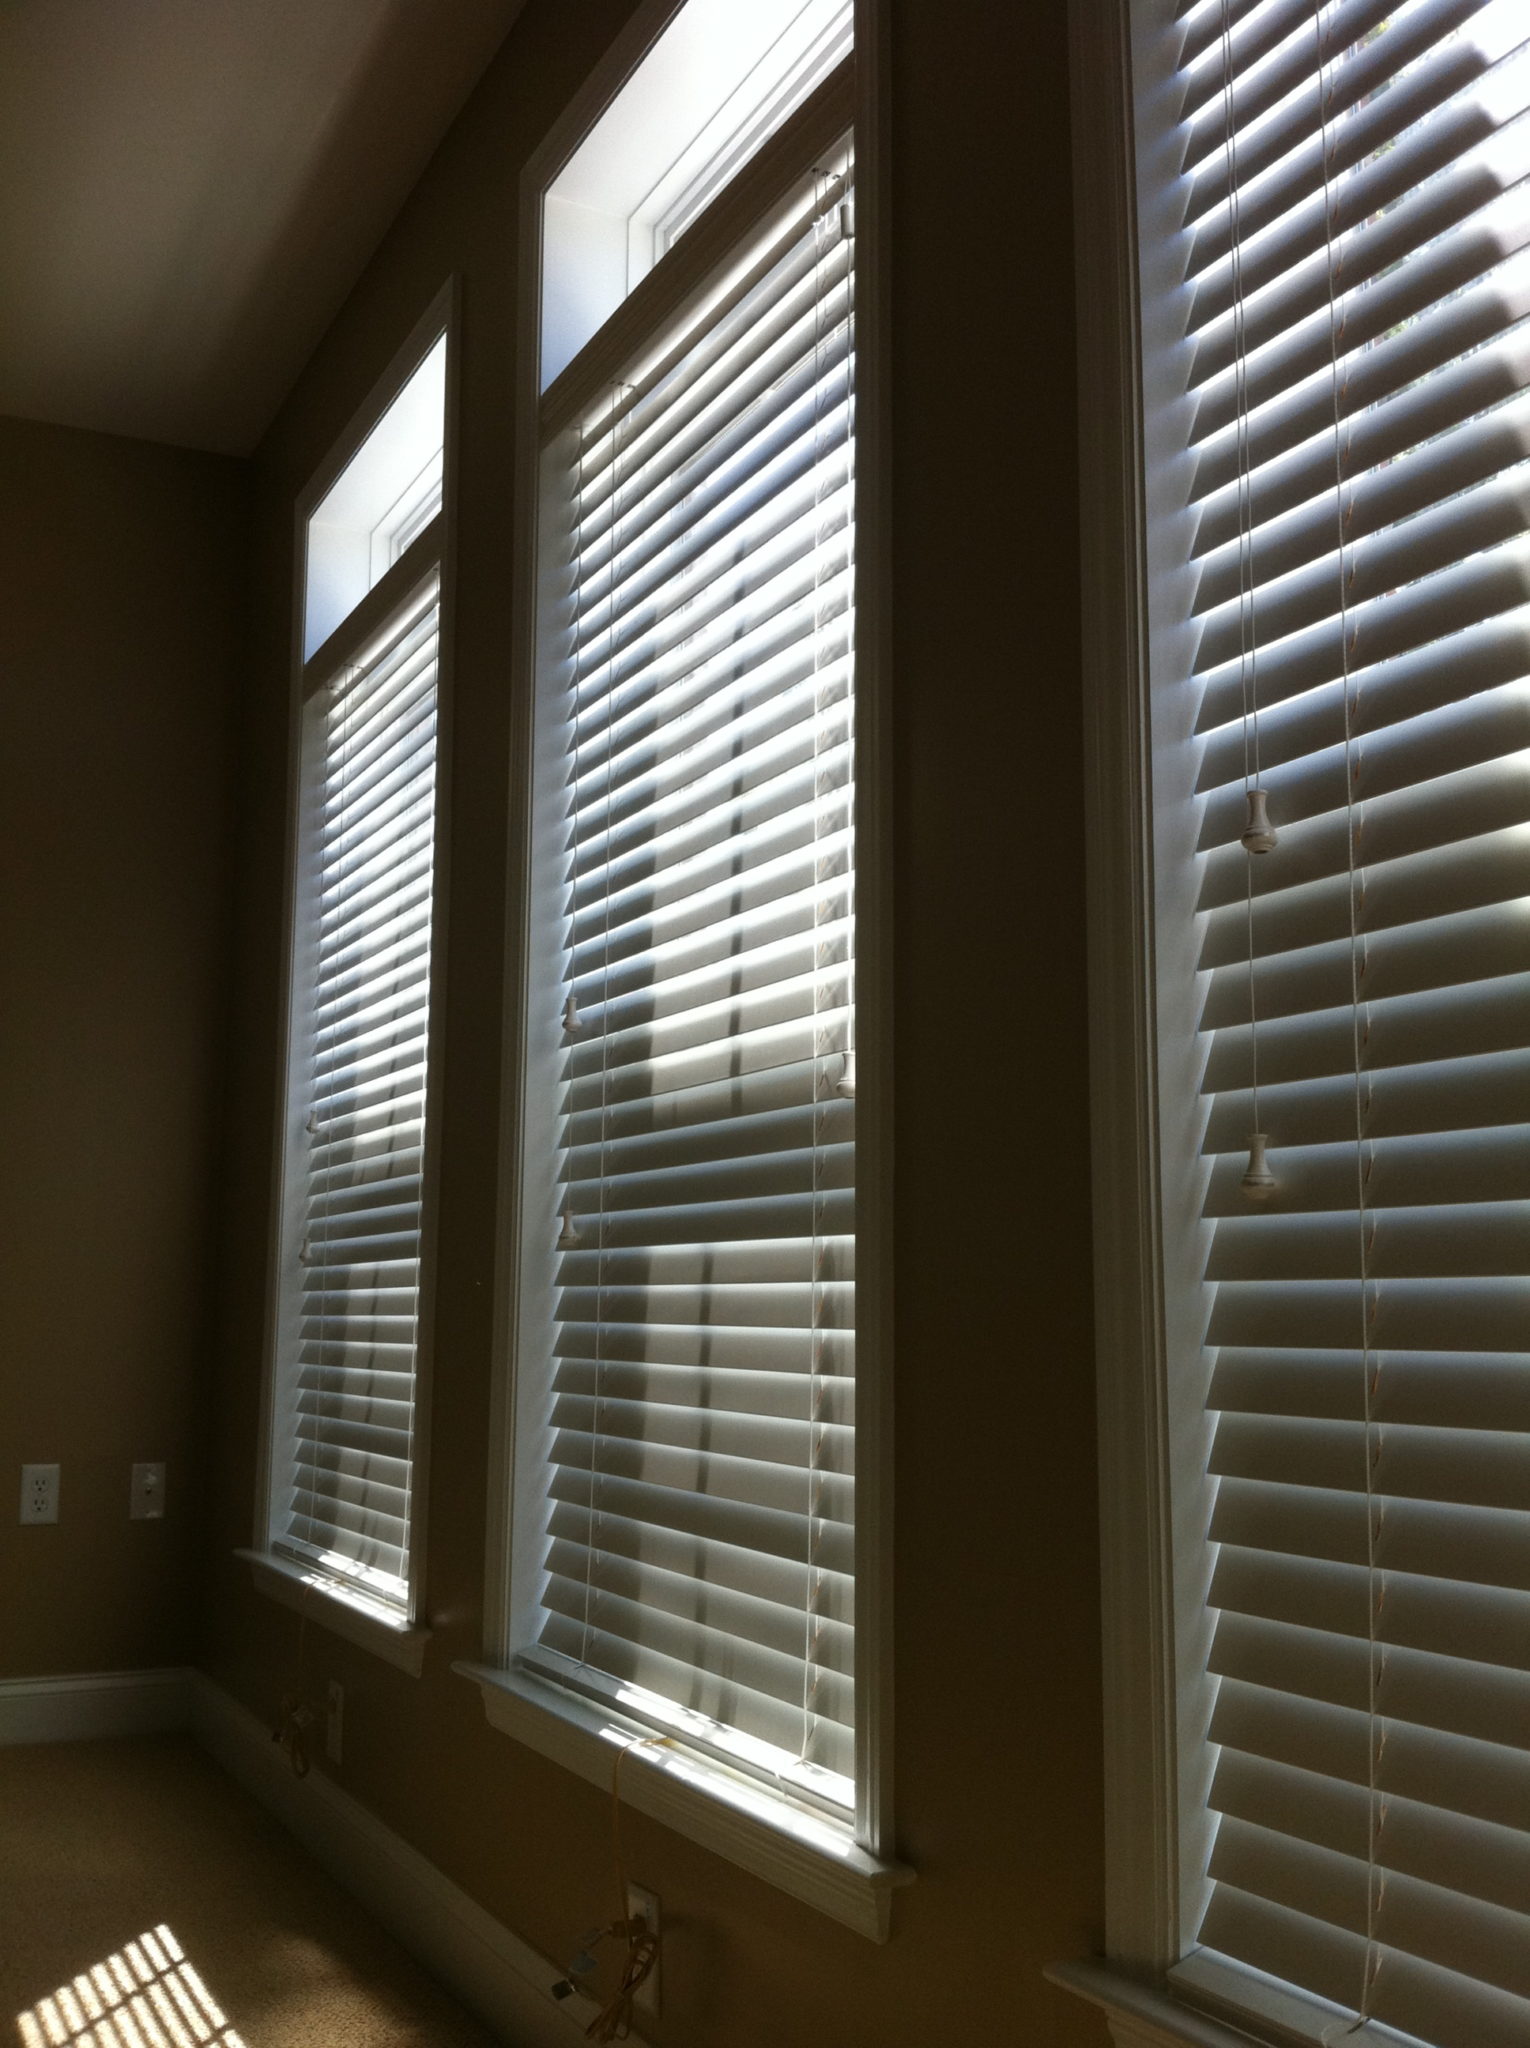 What are the benefits of wooden blinds